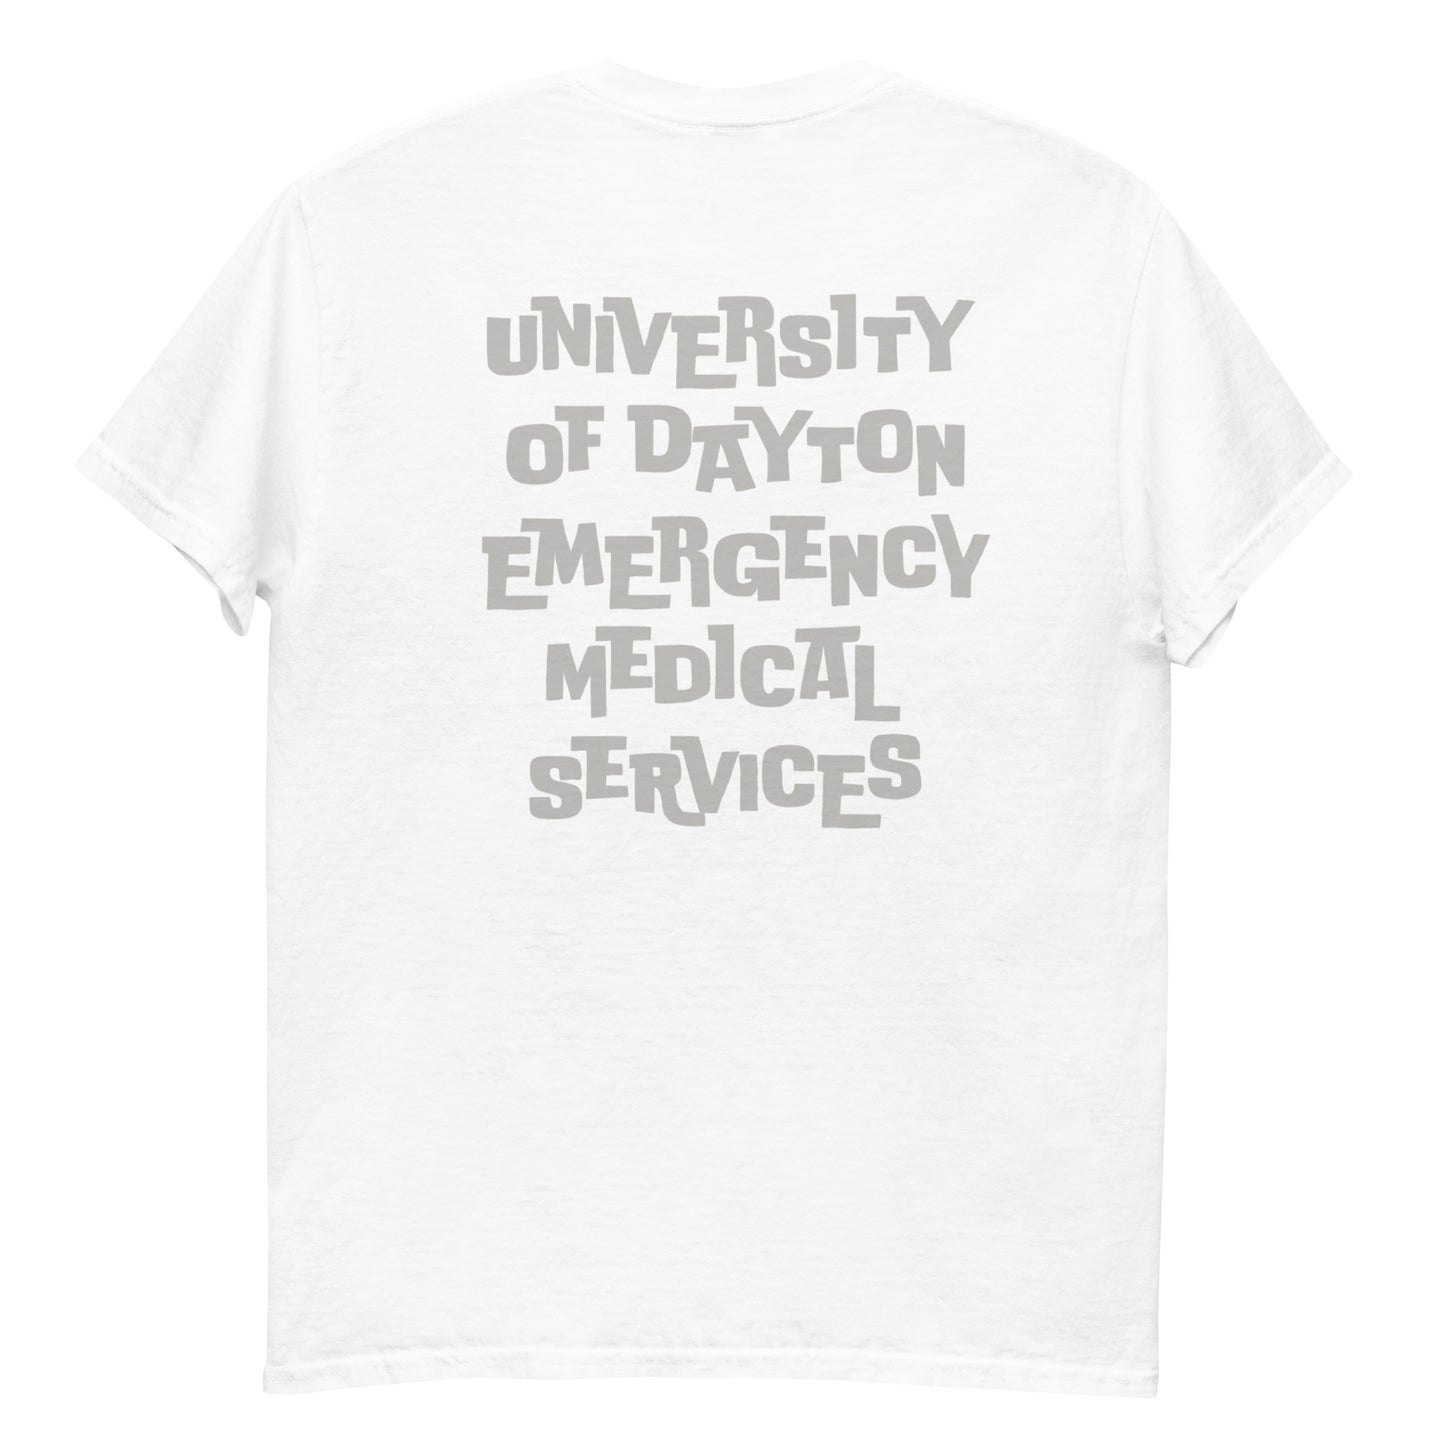 UD front and back EMS tee!